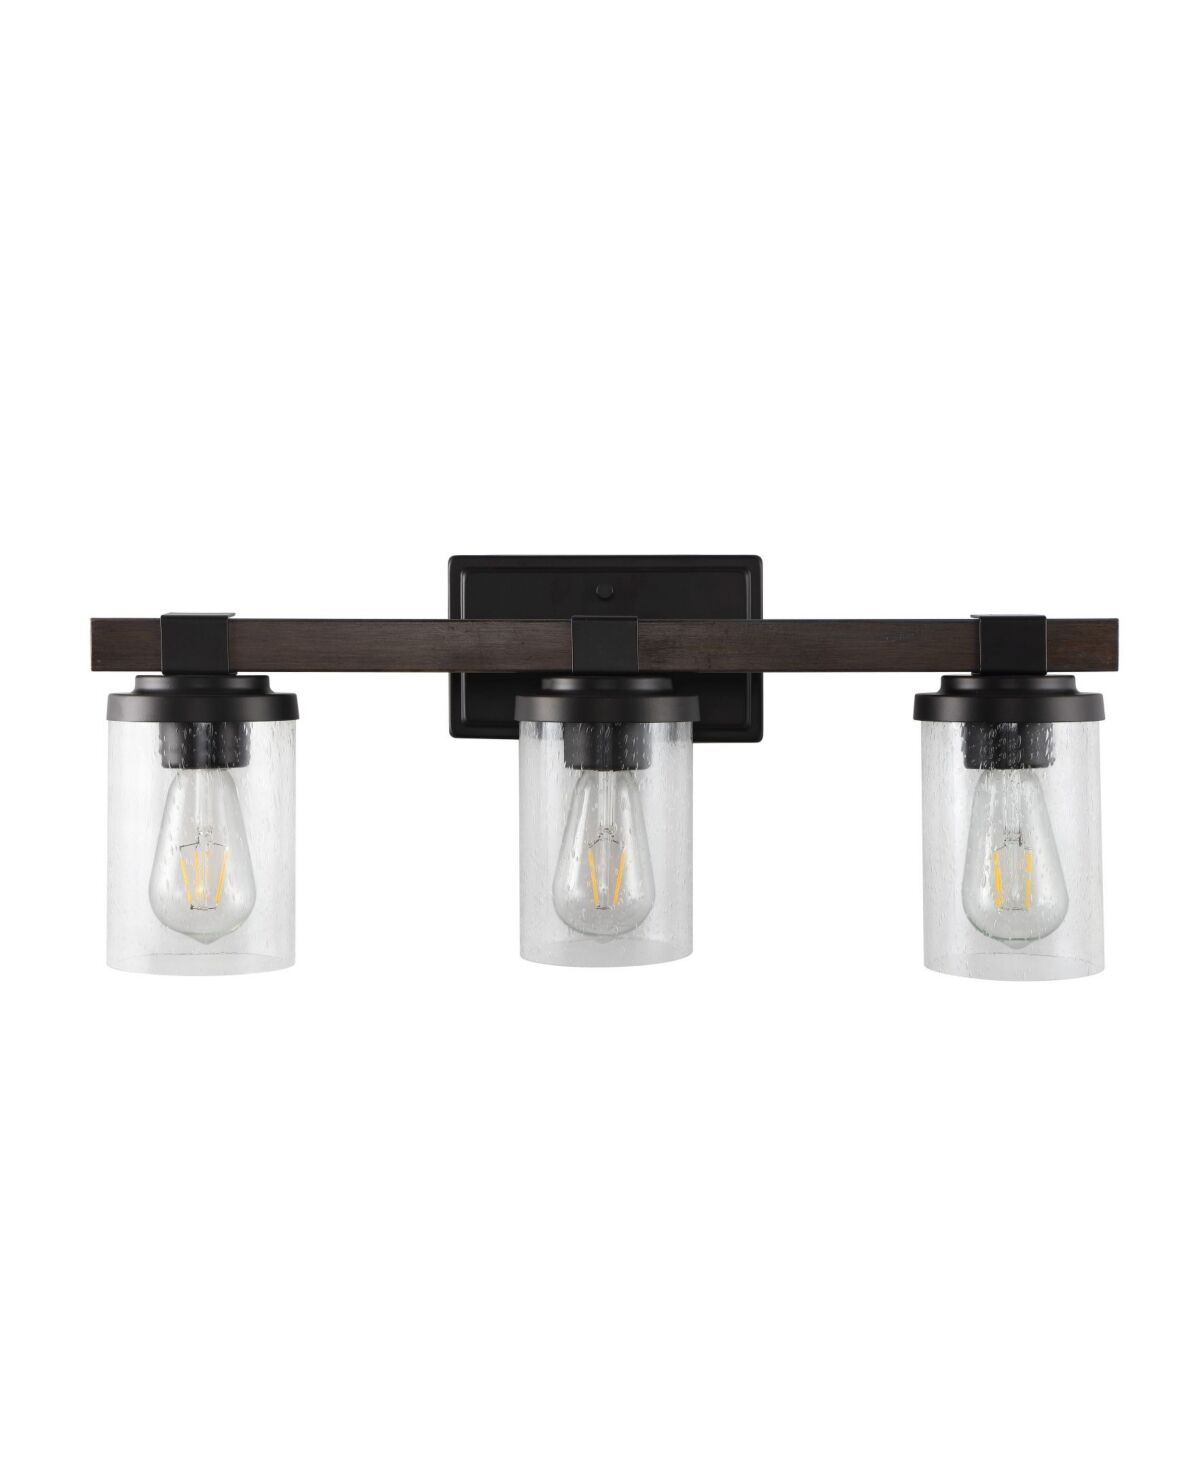 Jonathan Y Bungalow Iron/Seeded Glass Rustic Farmhouse Led Vanity Light - Oil rubbed bronze